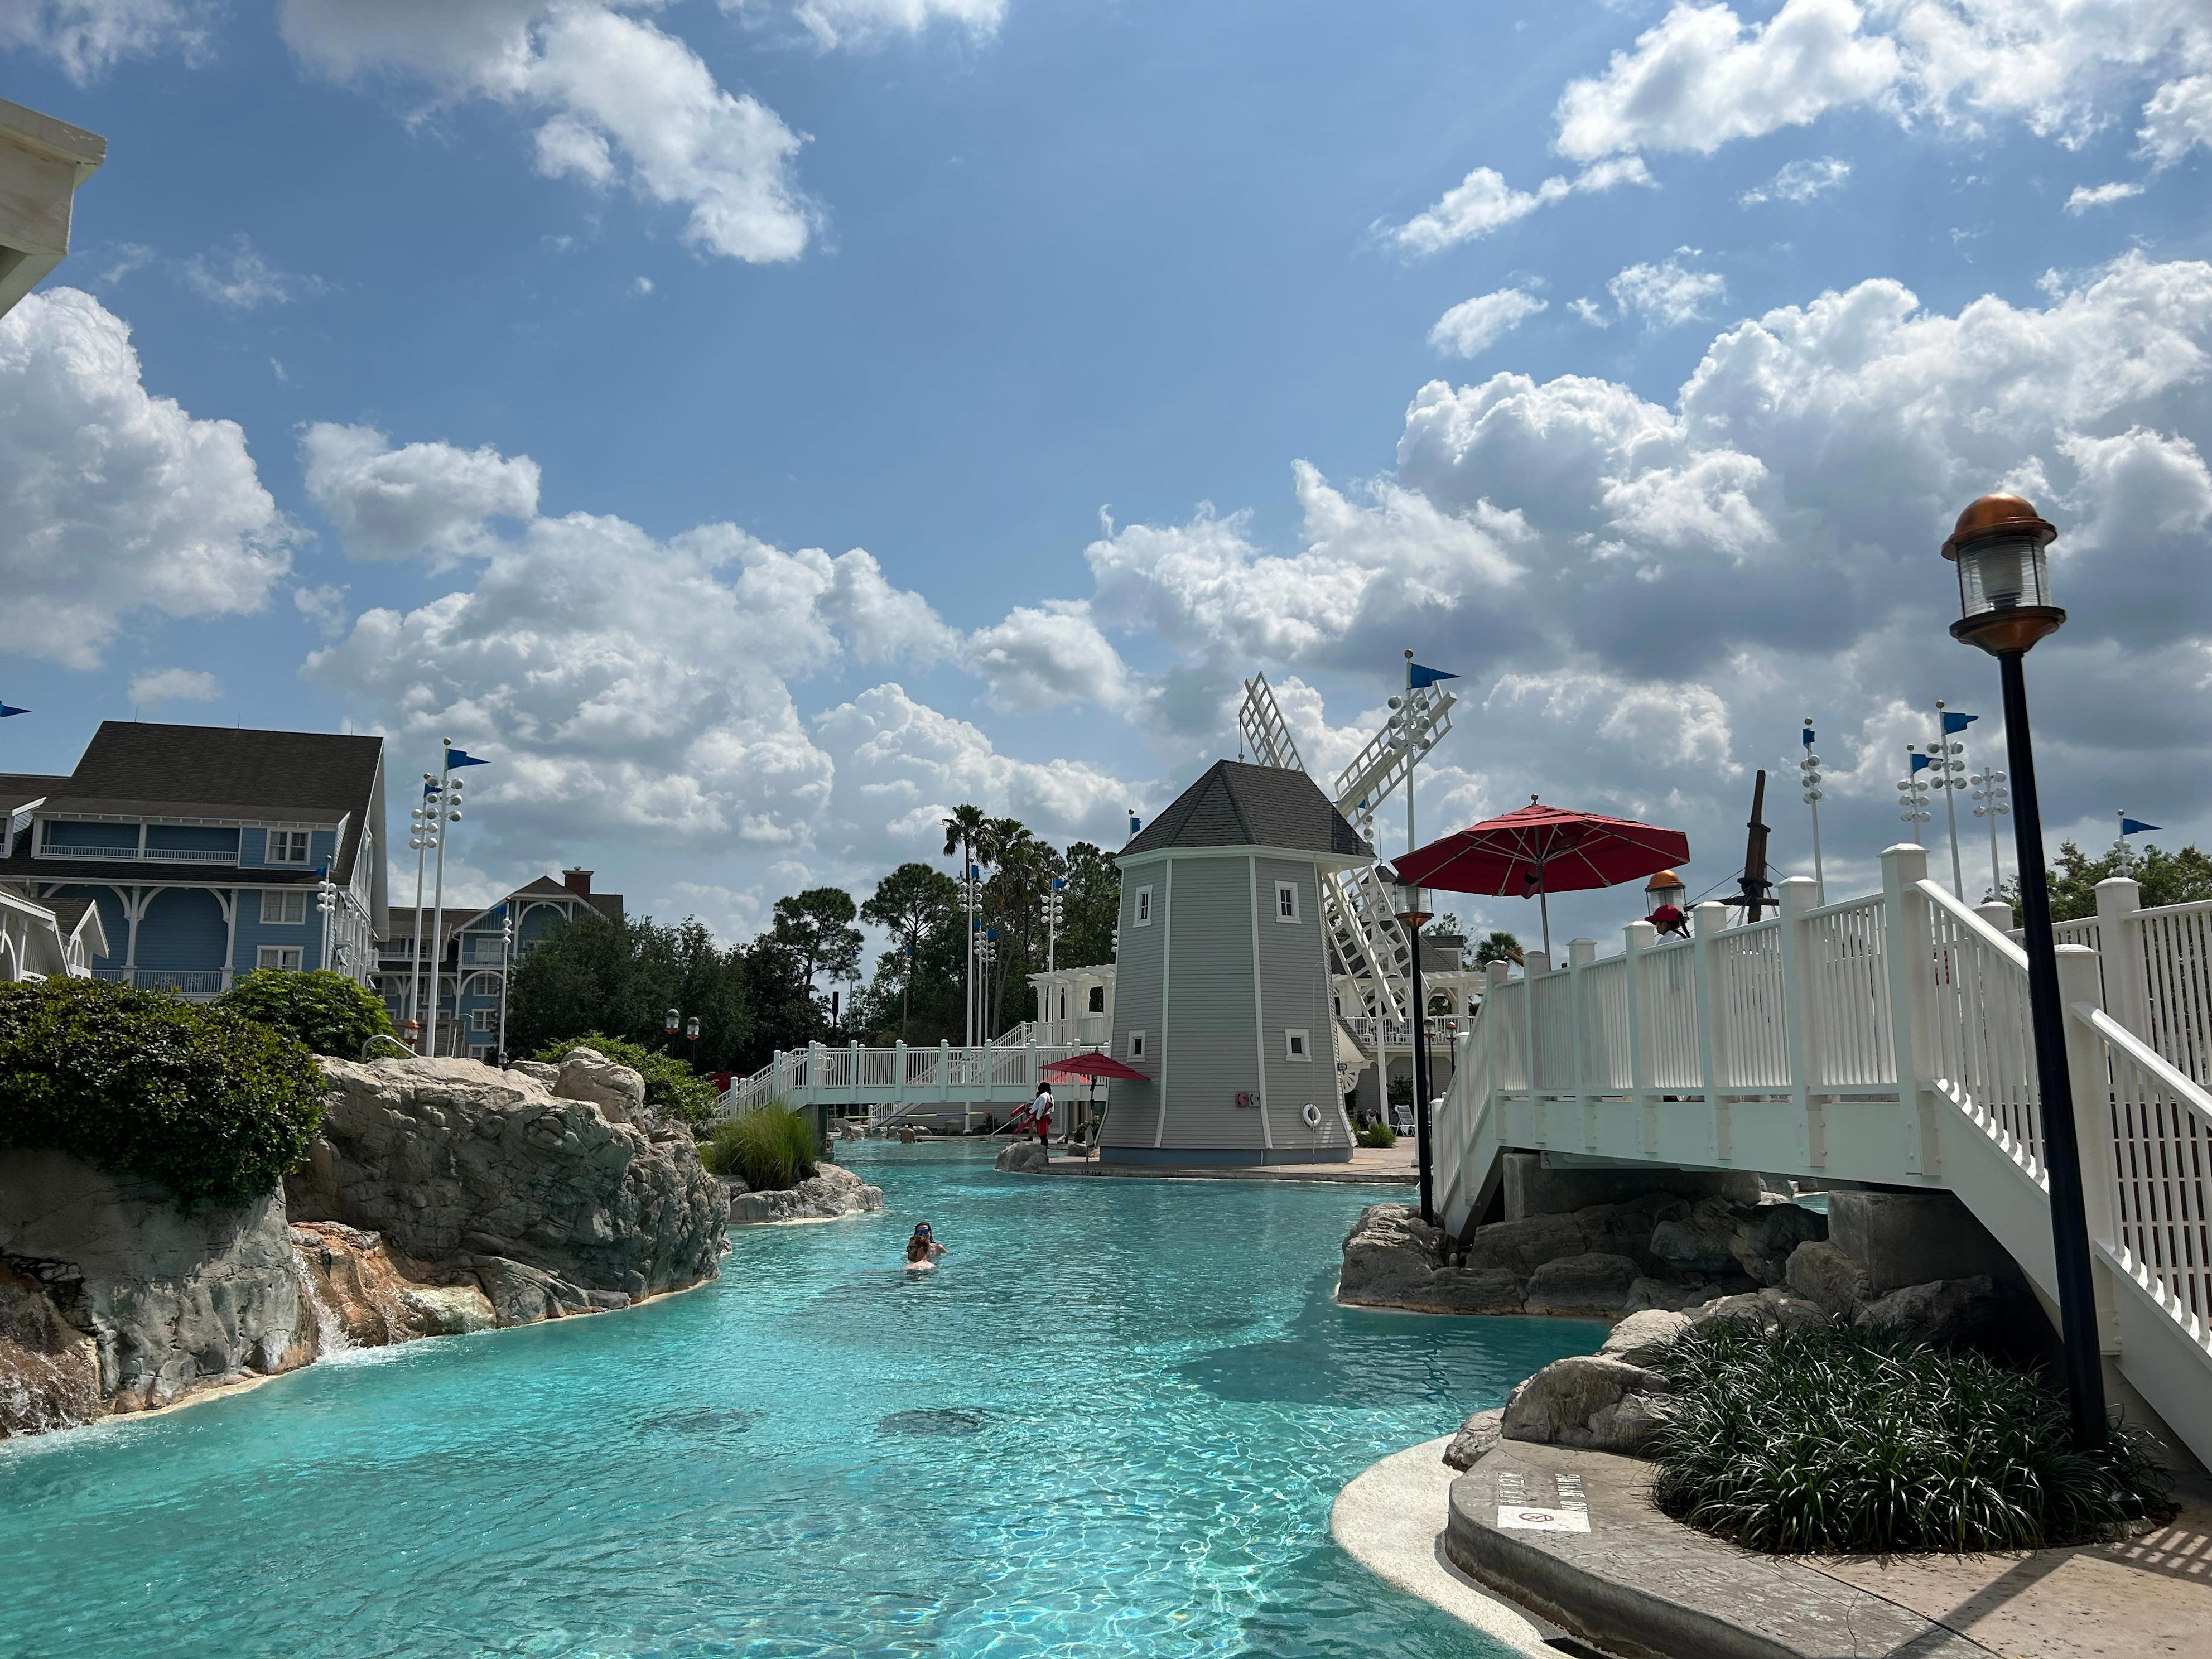 <p>Yacht Club resort is great for guests planning to spend a lot of time at their hotel — or Epcot and/or Hollywood Studios. The resort's close proximity to those two parks makes it a great choice for travelers who enjoy taking a midday break.</p><p>With its many on-site dining options, Yacht Club is an excellent choice for folks who prioritize <a href="https://www.insider.com/best-cheap-fun-food-for-a-day-at-disney-world-2022-4">being able to get a great meal</a> without traveling far. If you value a great pool while on vacation, it's also hard to beat either the Beach or Yacht club. </p><p>With all of that in mind, the Yacht Club is one of my absolute favorite resorts on Disney World property and absolutely worth the price point.</p>